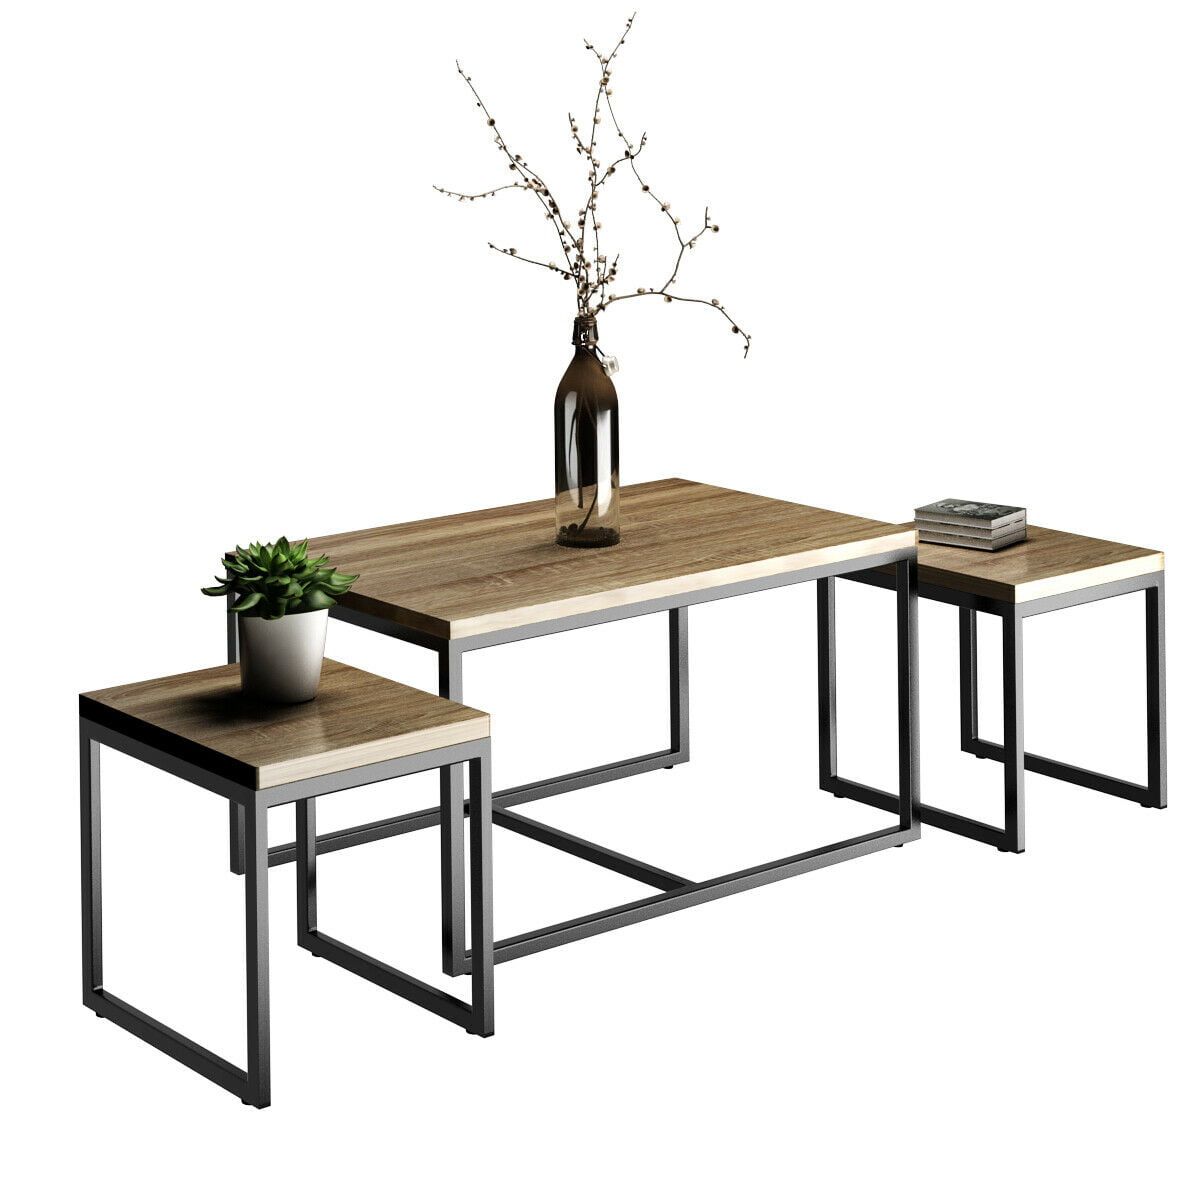 Costway 3 Piece Nesting Coffee & End Table Set Wood Modern Living Room Throughout Coffee Tables Of 3 Nesting Tables (Gallery 3 of 20)